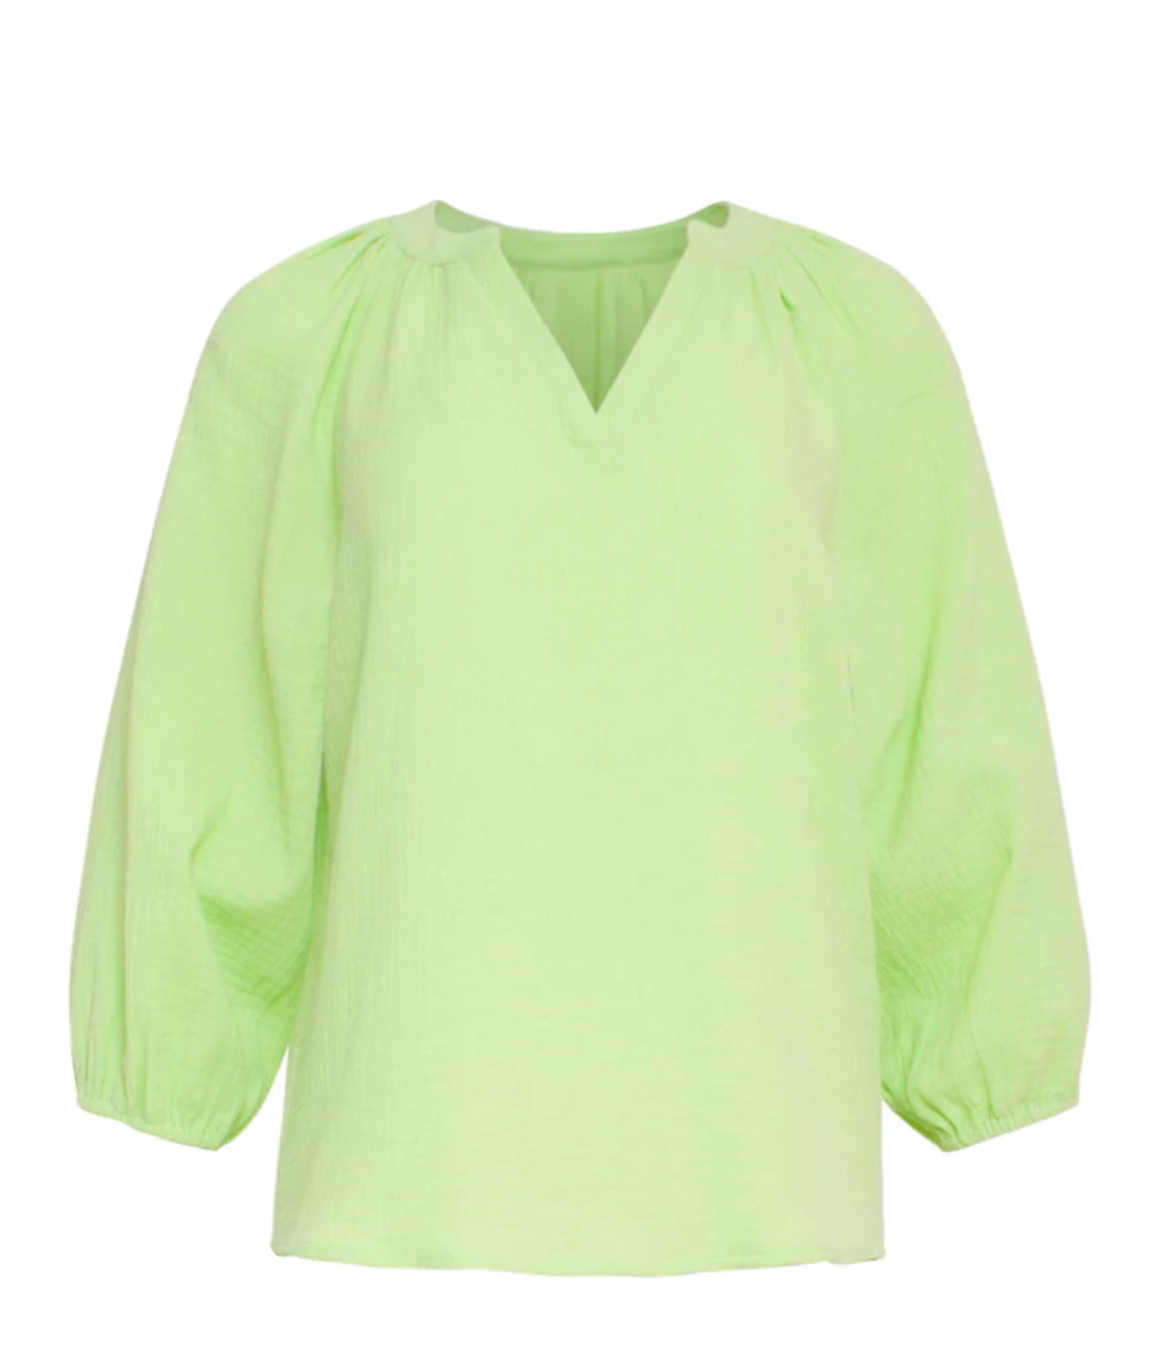 AIRY TOP IN LIME GREEN TETRA